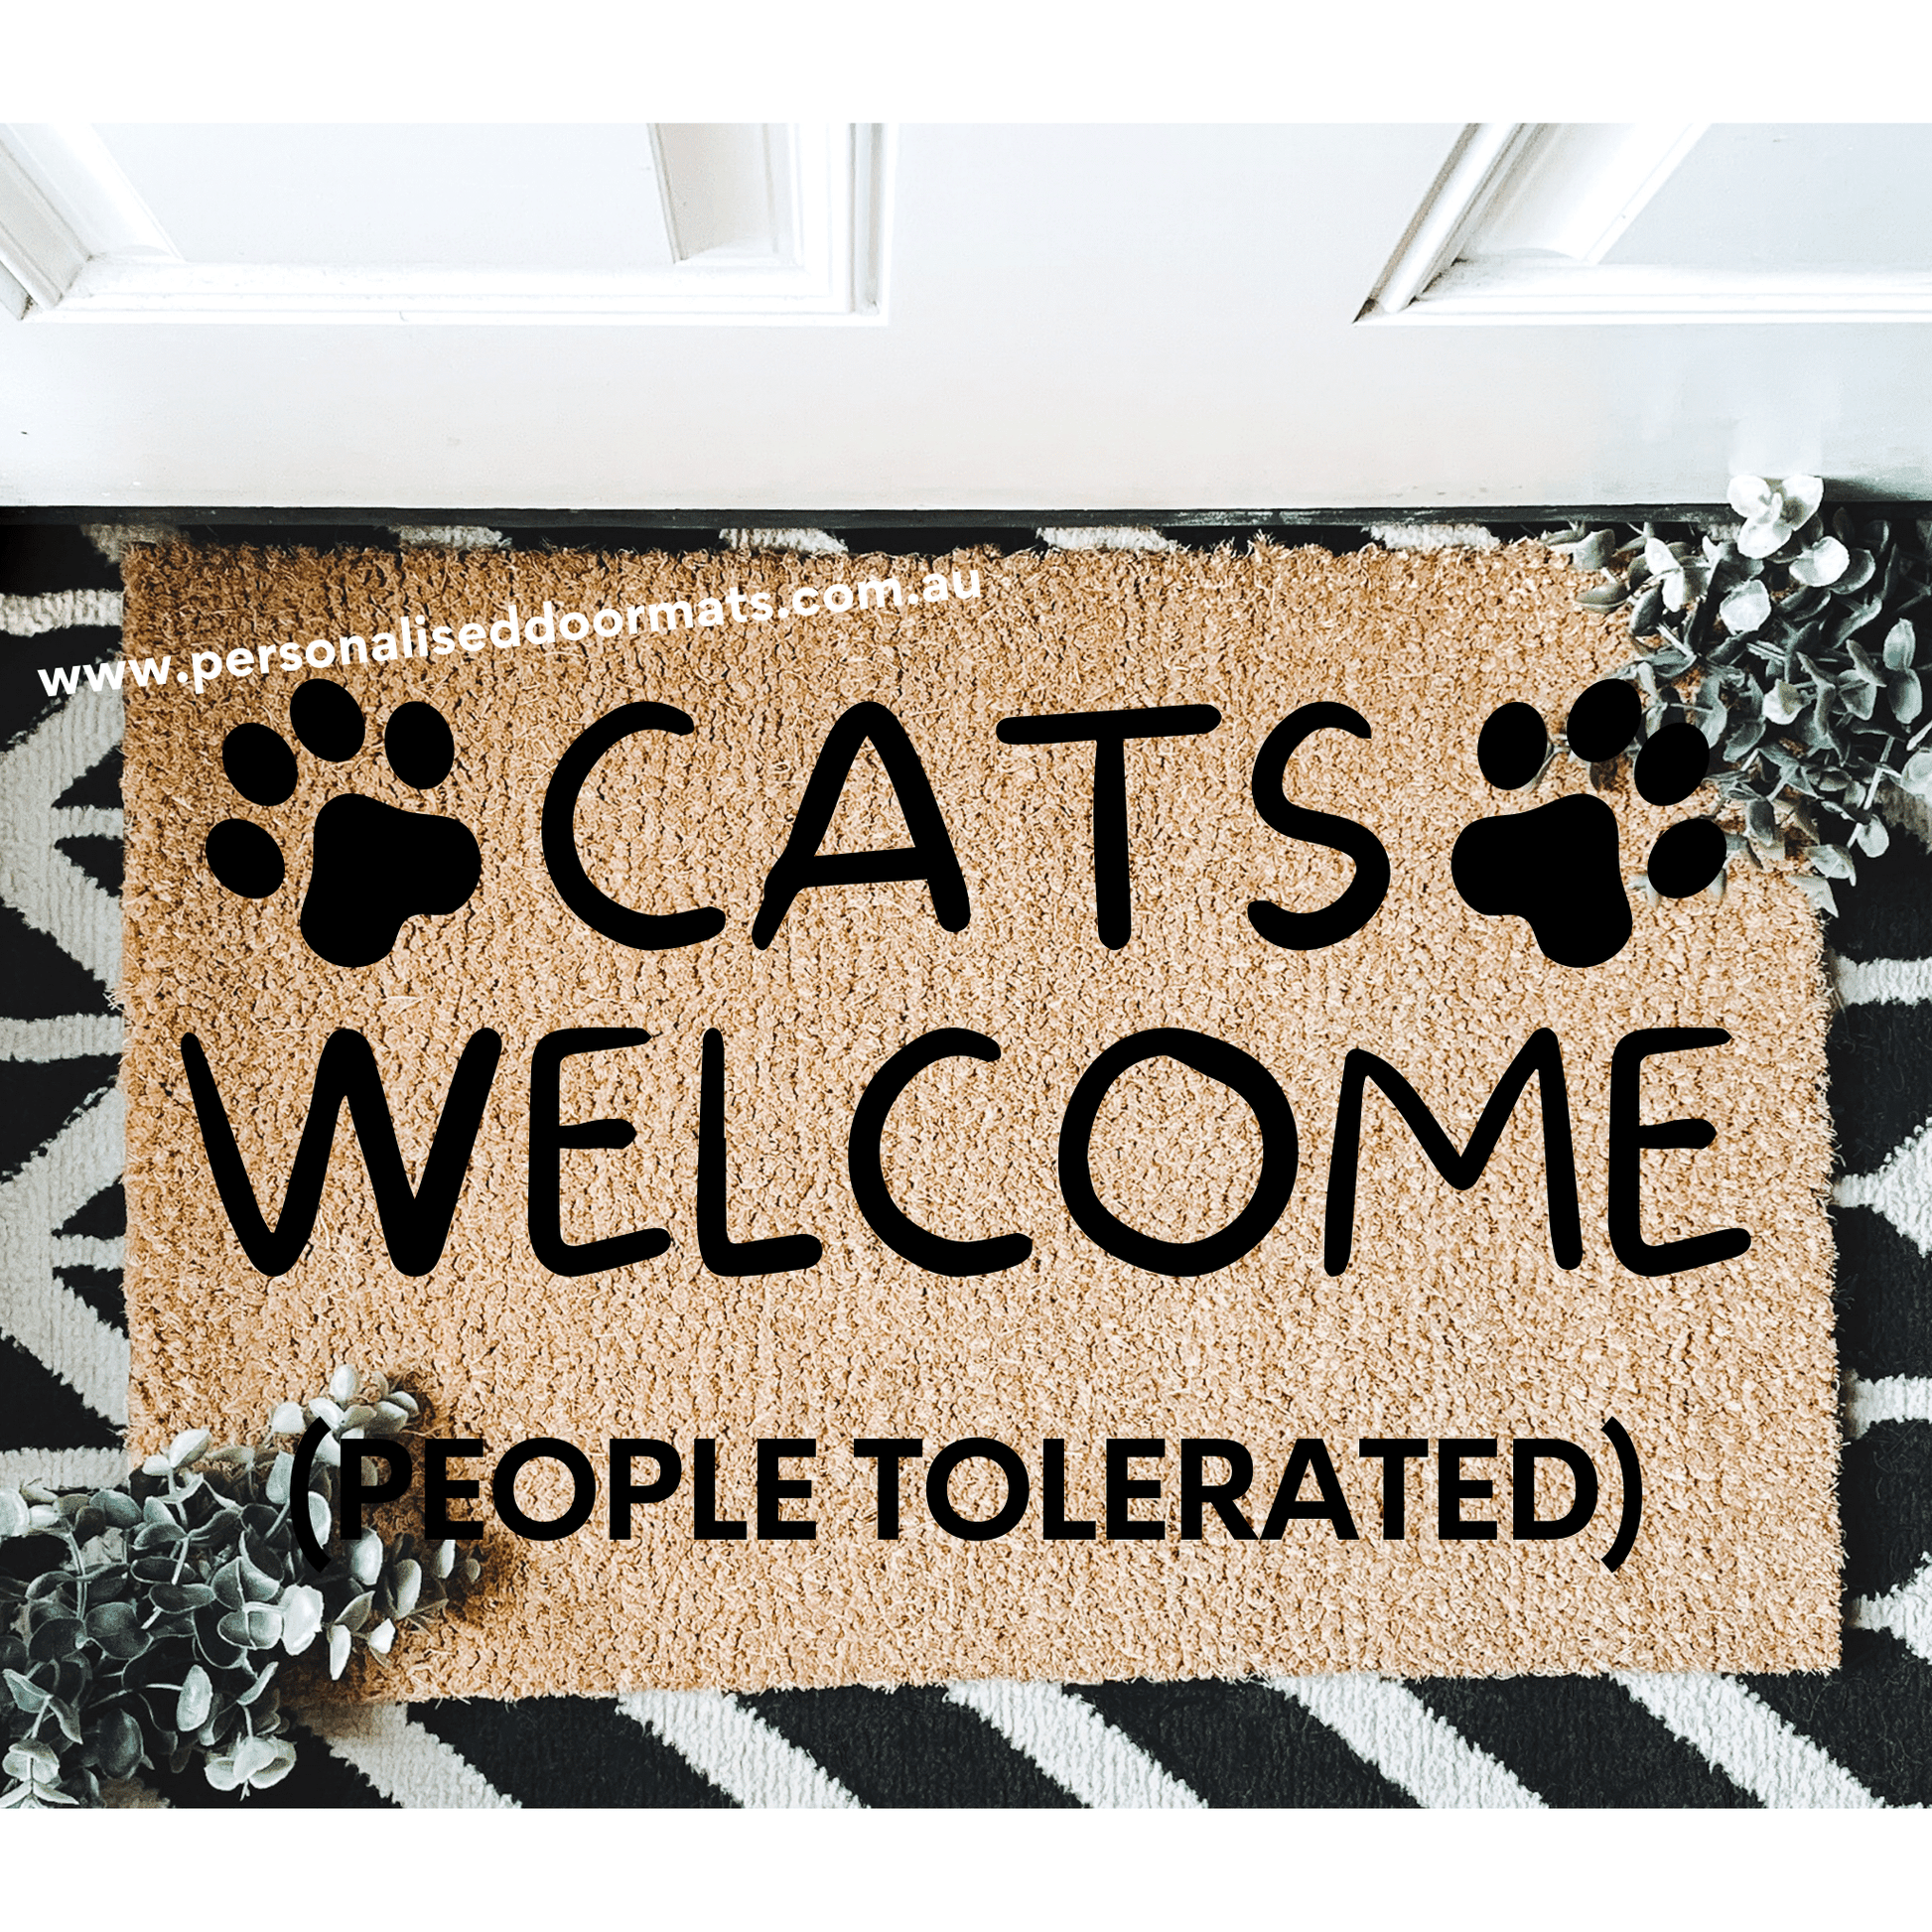 Cats welcomed people tolerated - Personalised Doormat Australia